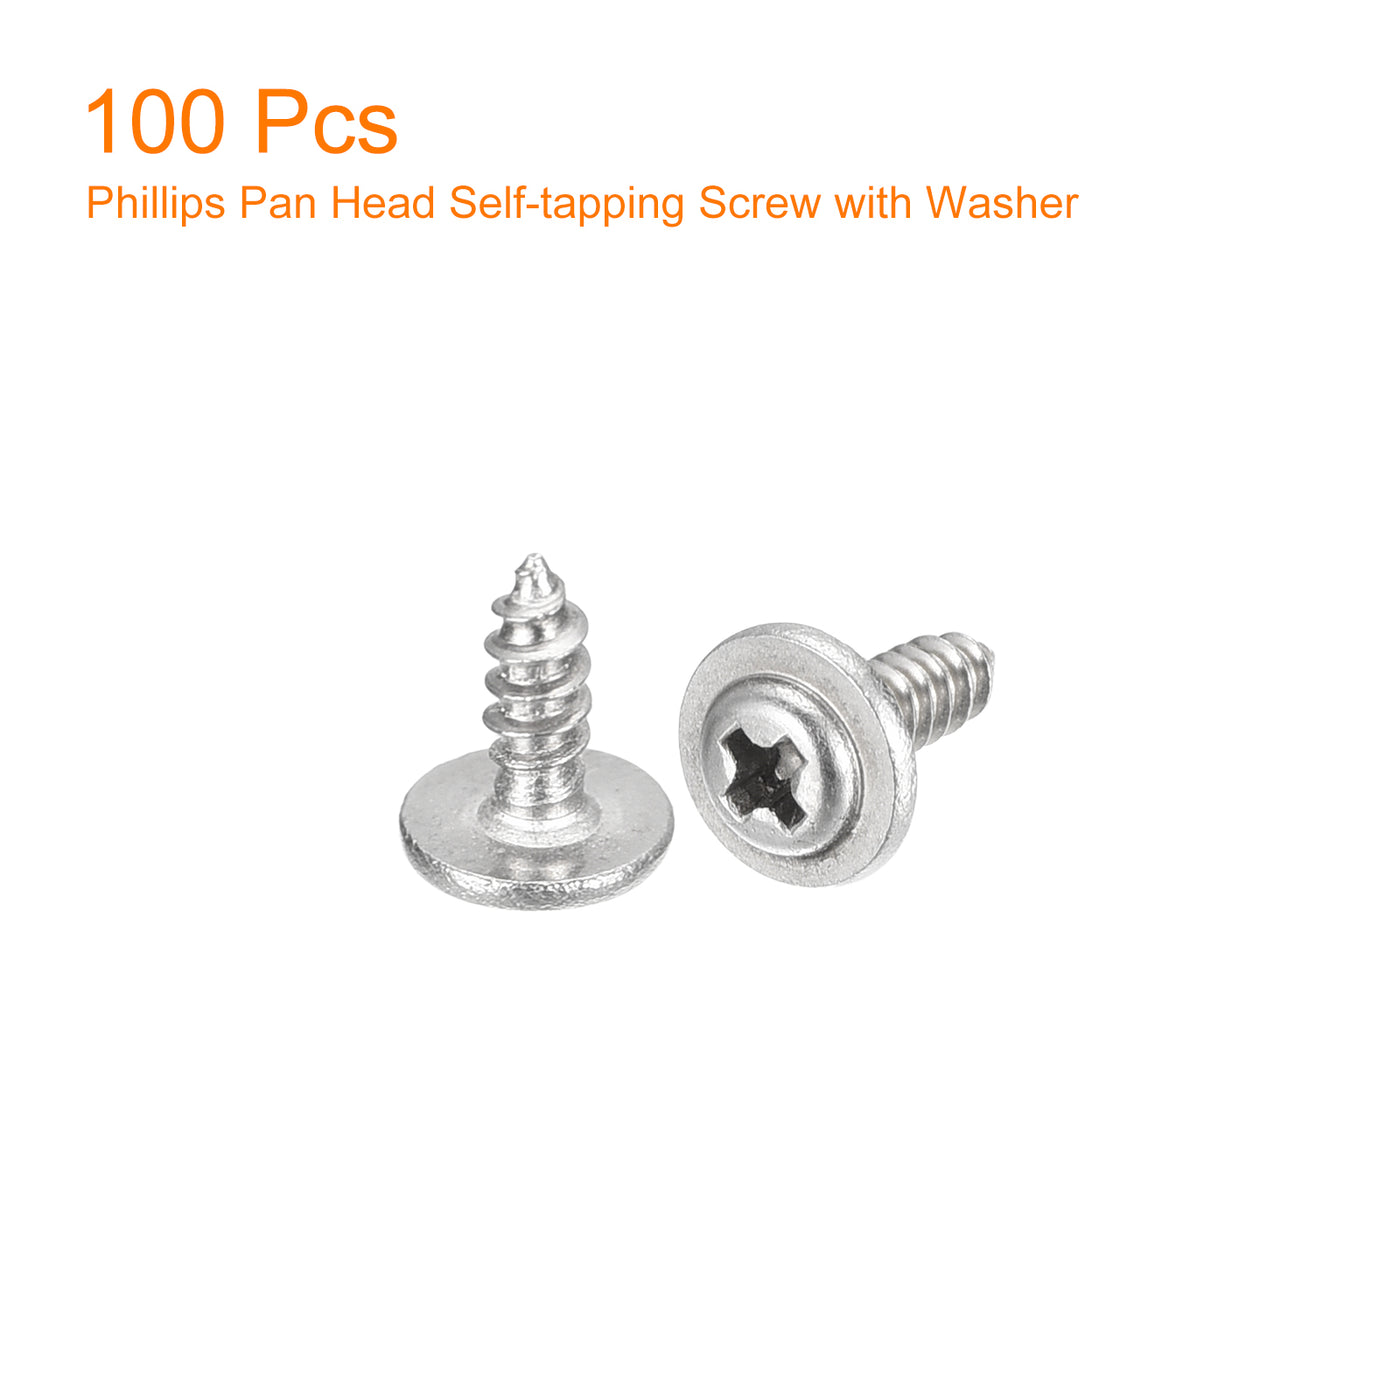 uxcell Uxcell ST2.3x6mm Phillips Pan Head Self-tapping Screw with Washer, 100pcs - 304 Stainless Steel Wood Screw Full Thread (Silver)